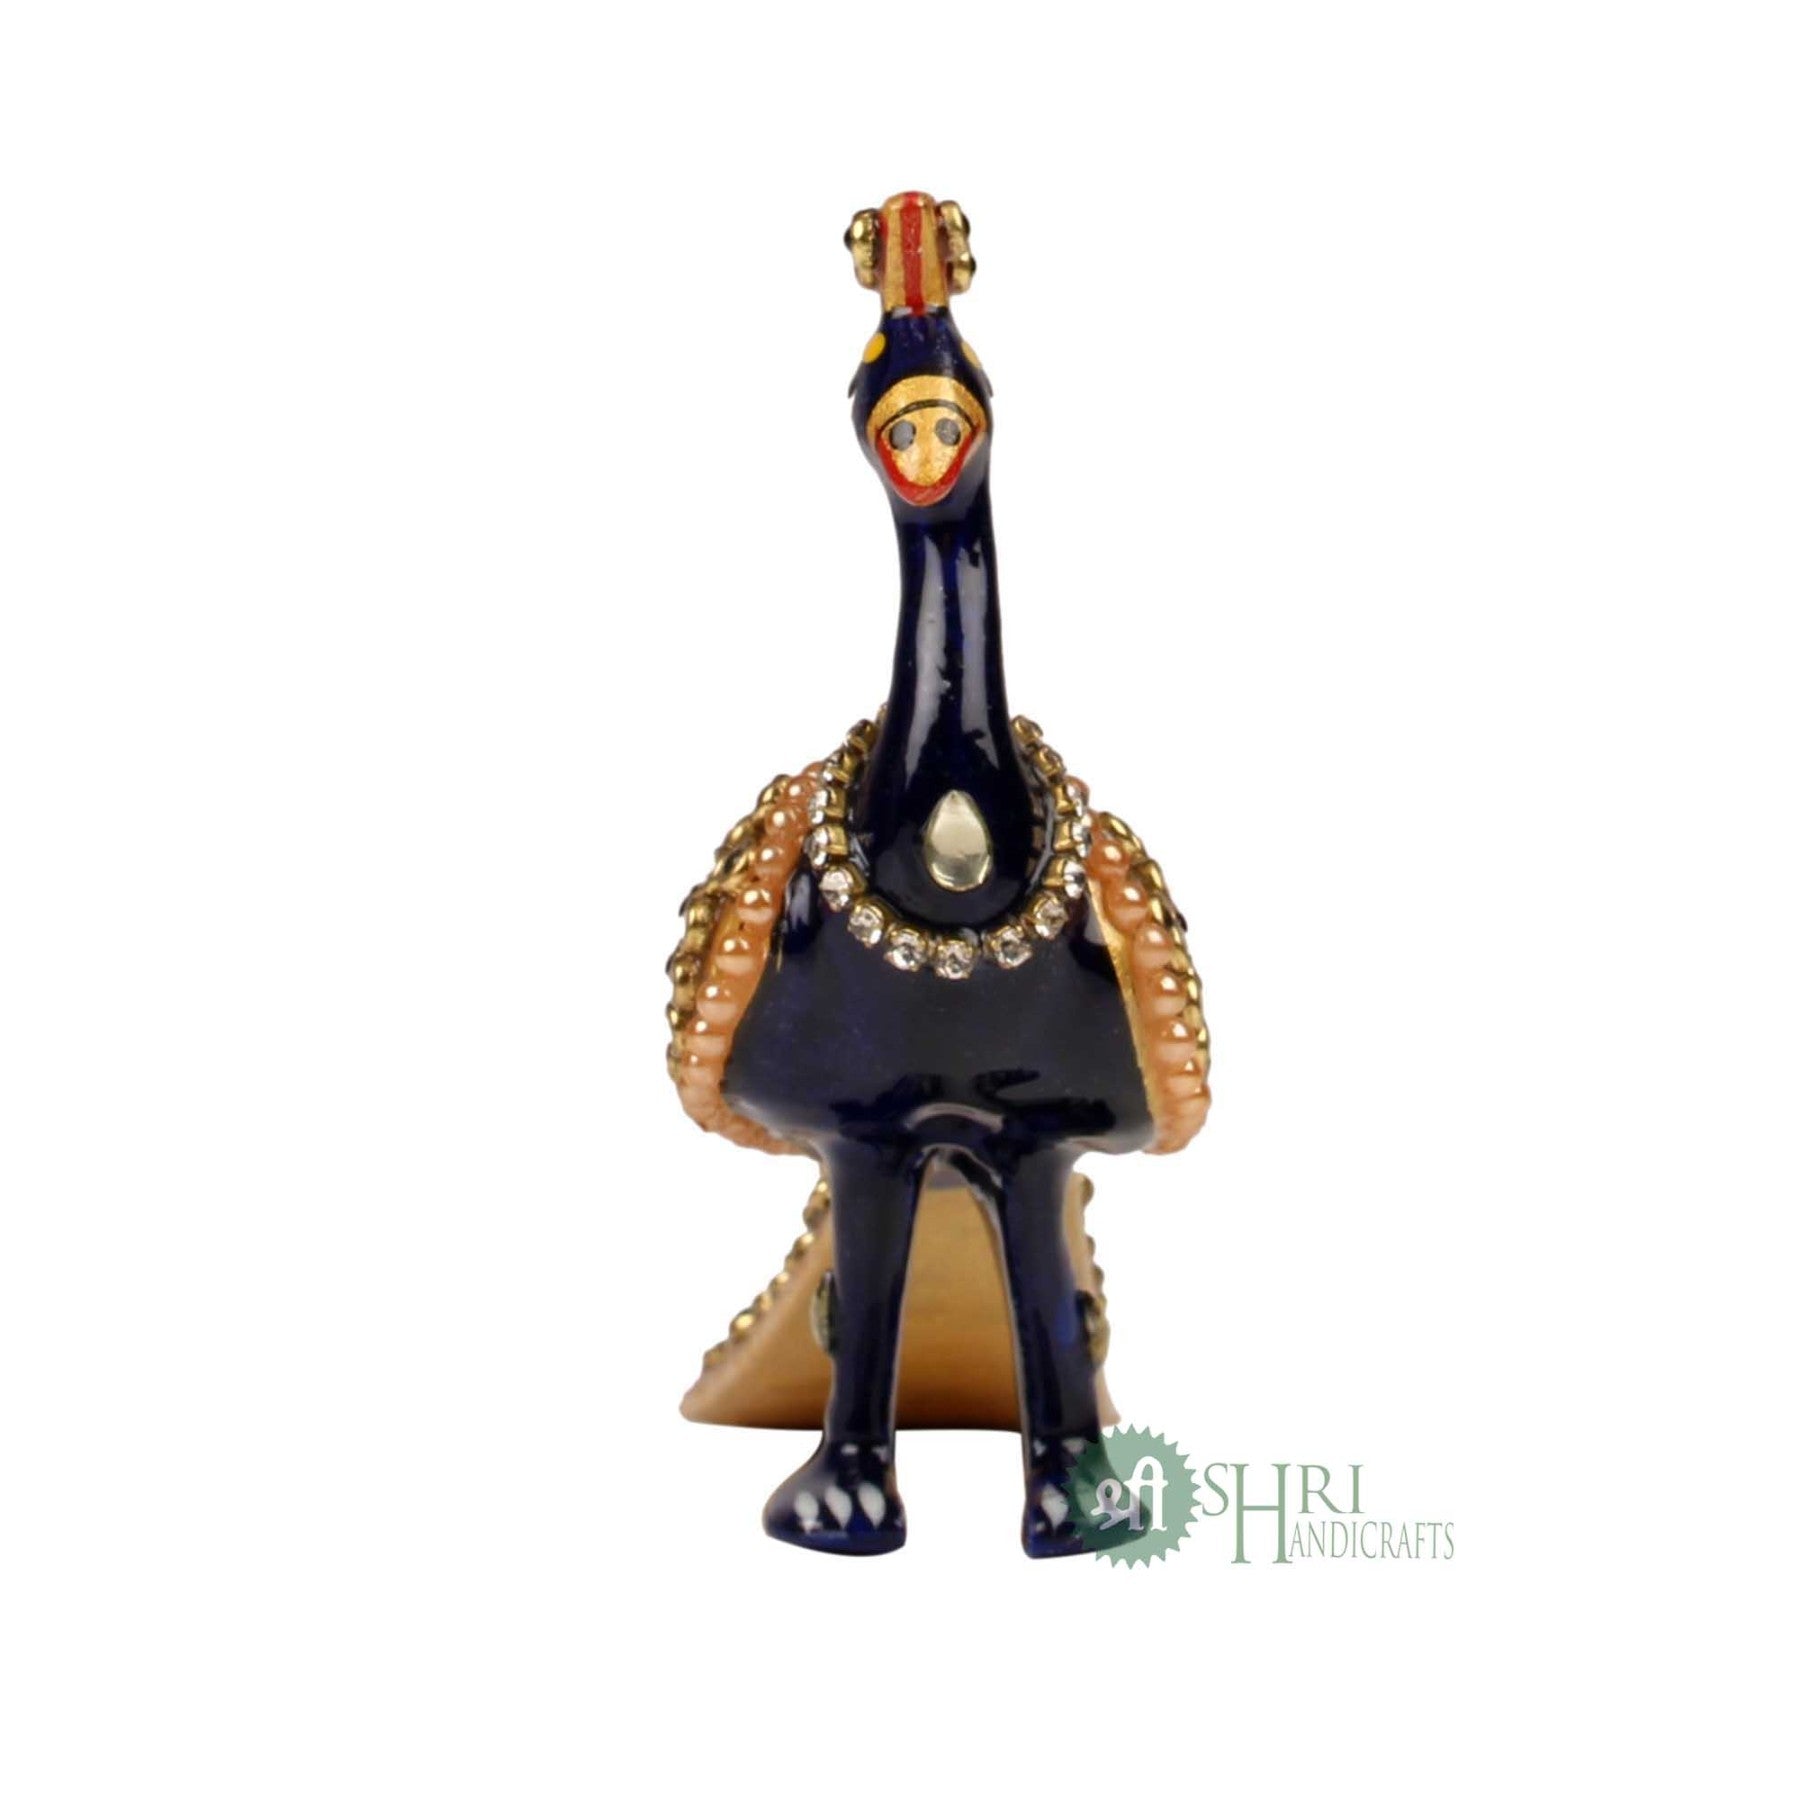 4"PEACOCK WITH TELL JWELLERY STONE STATUE MT